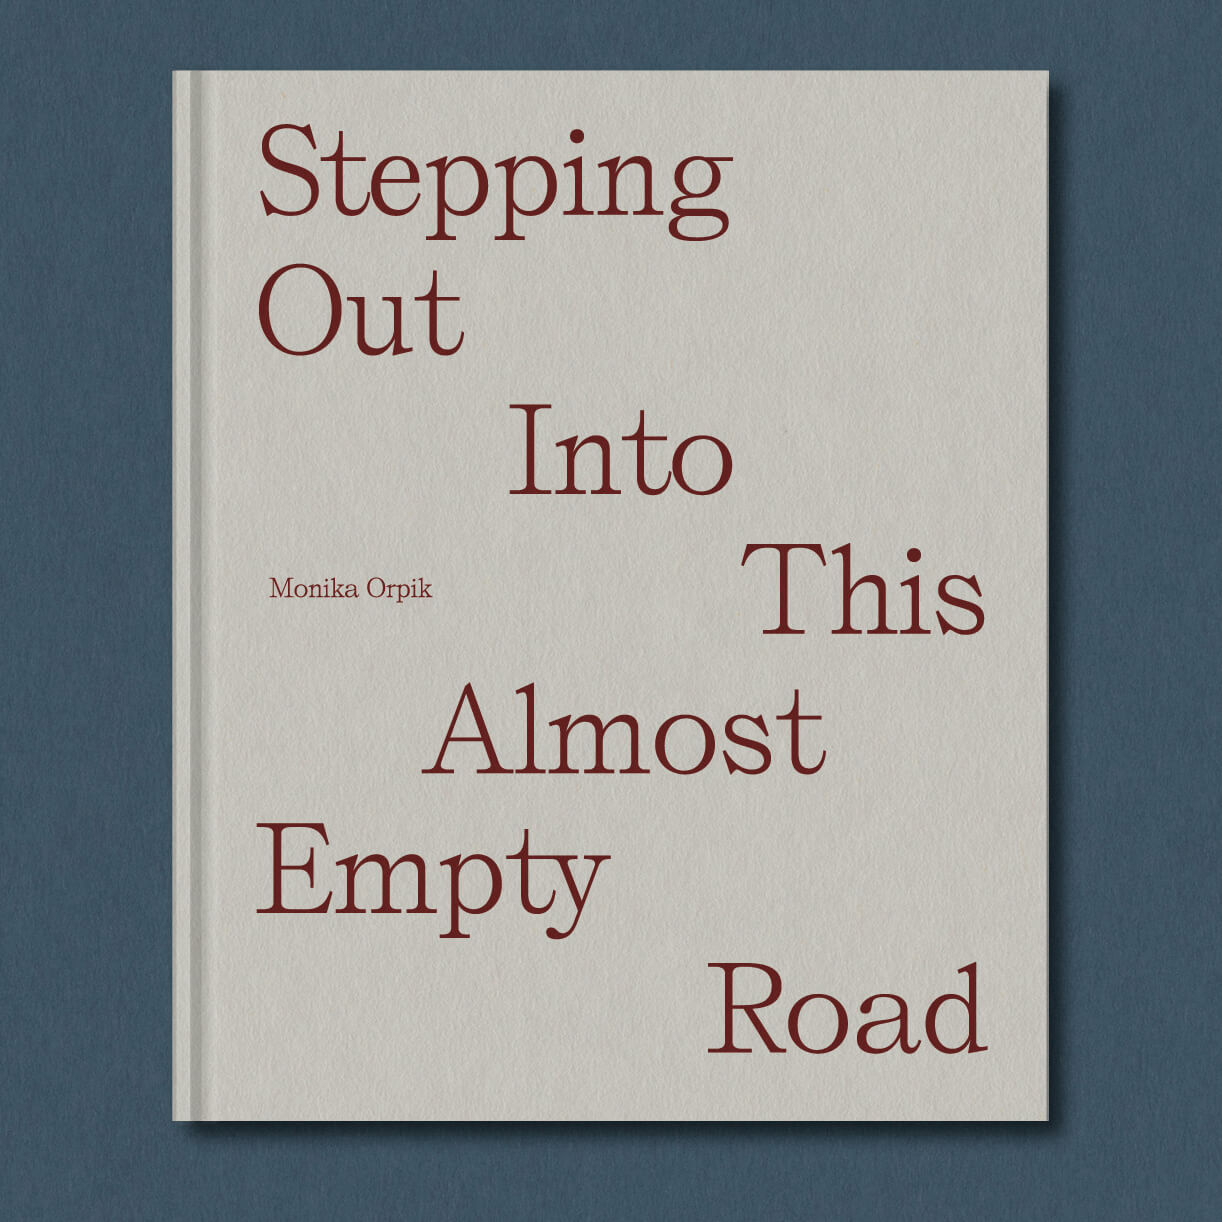 Monika Orpik – Stepping Out Into This Almost Empty Road